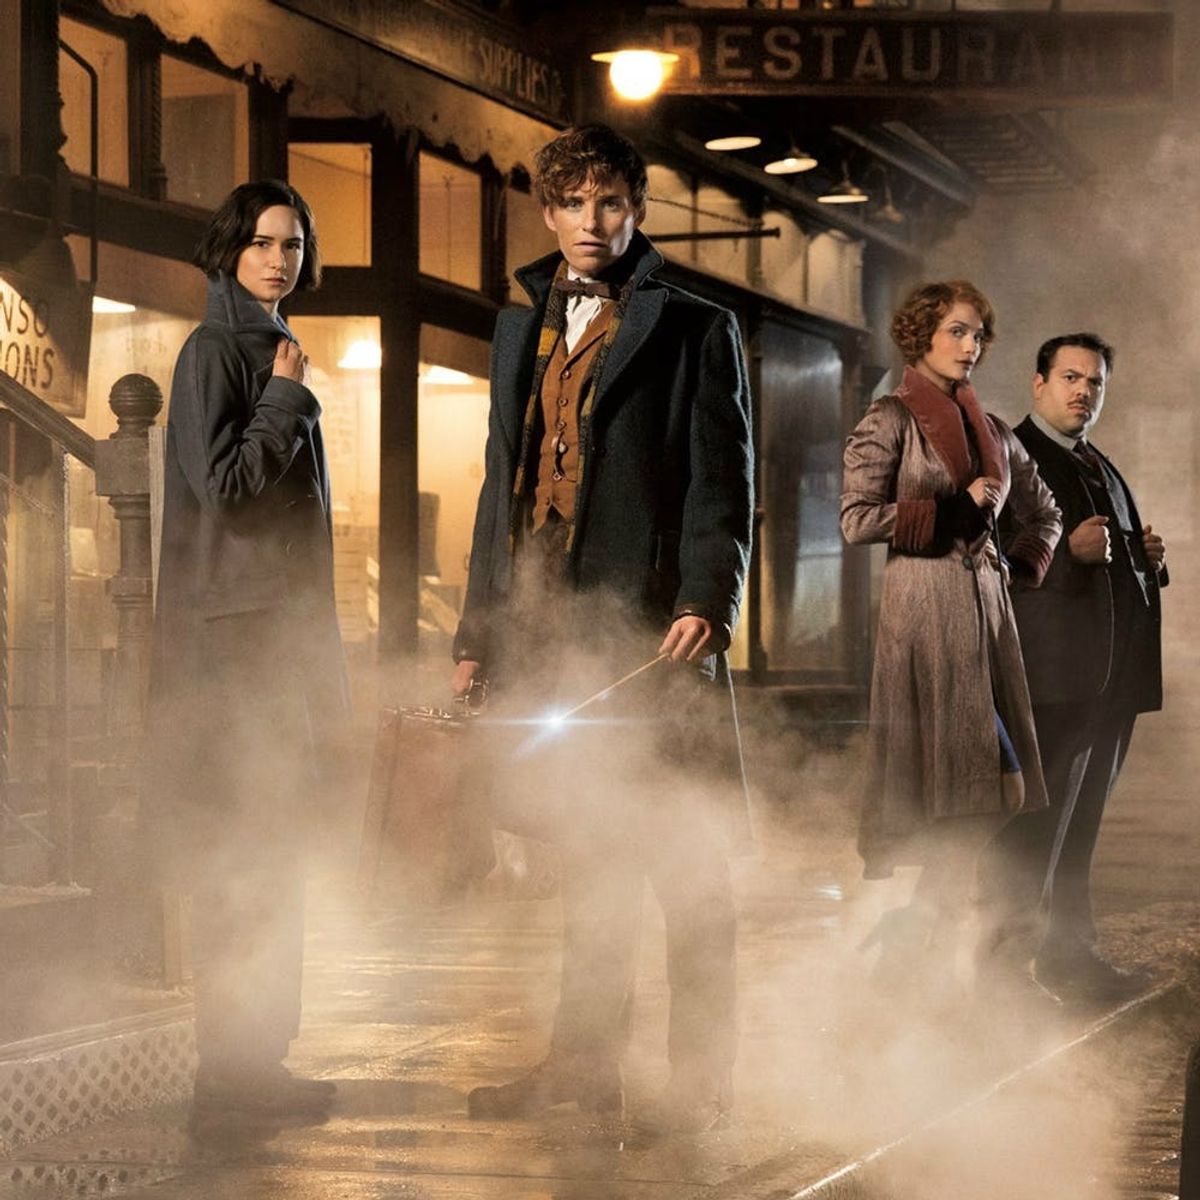 This Is Your First Look at the New Trailer for Fantastic Beasts